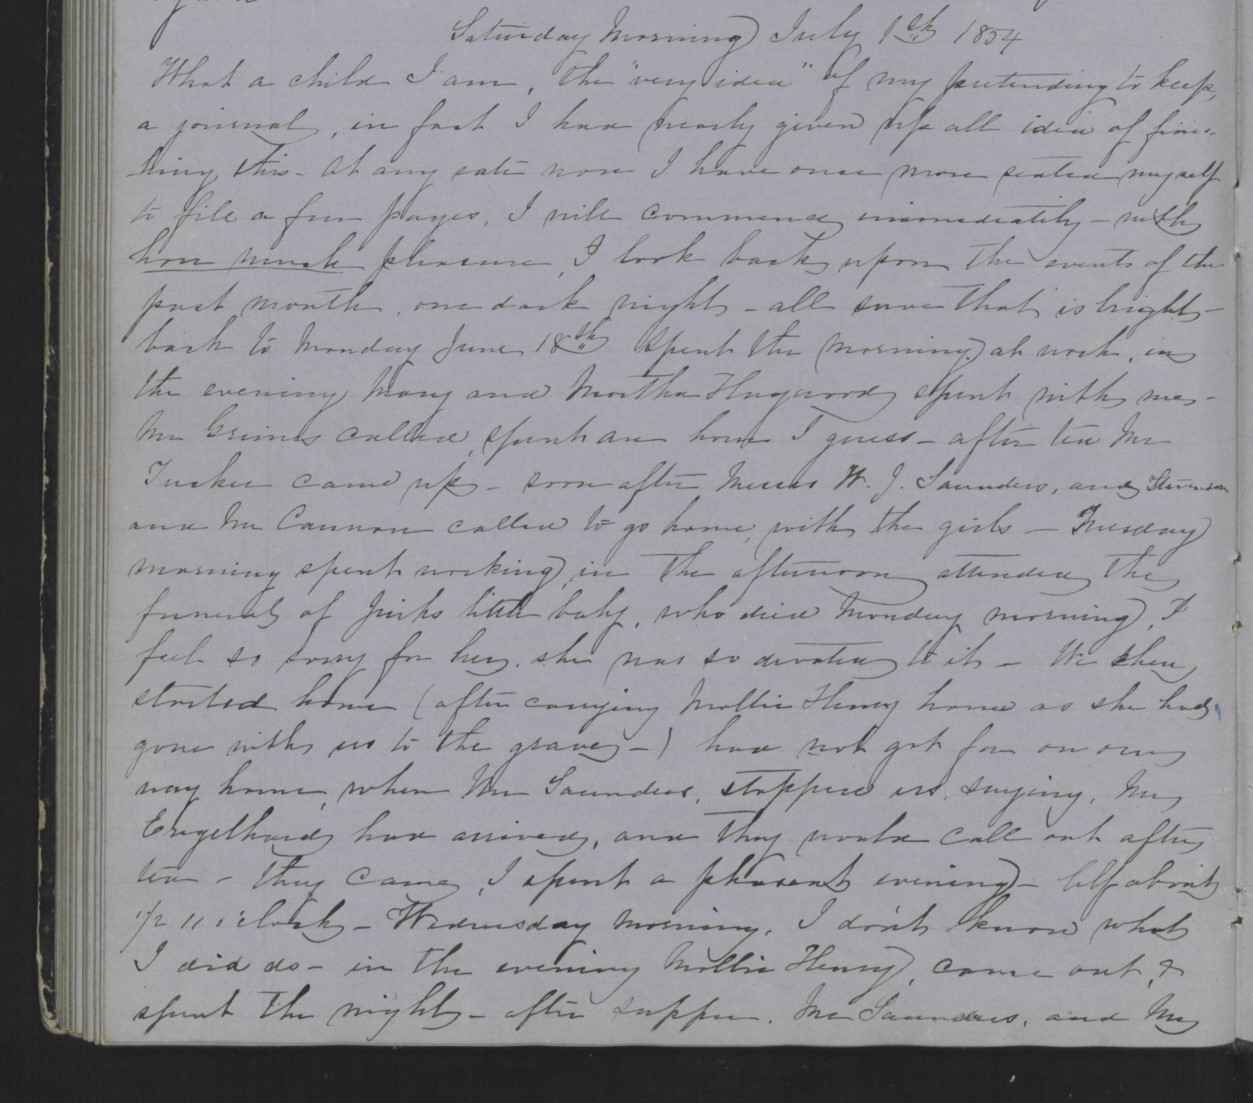 Diary Entry from Margaret Eliza Cotten, 1 July 1854